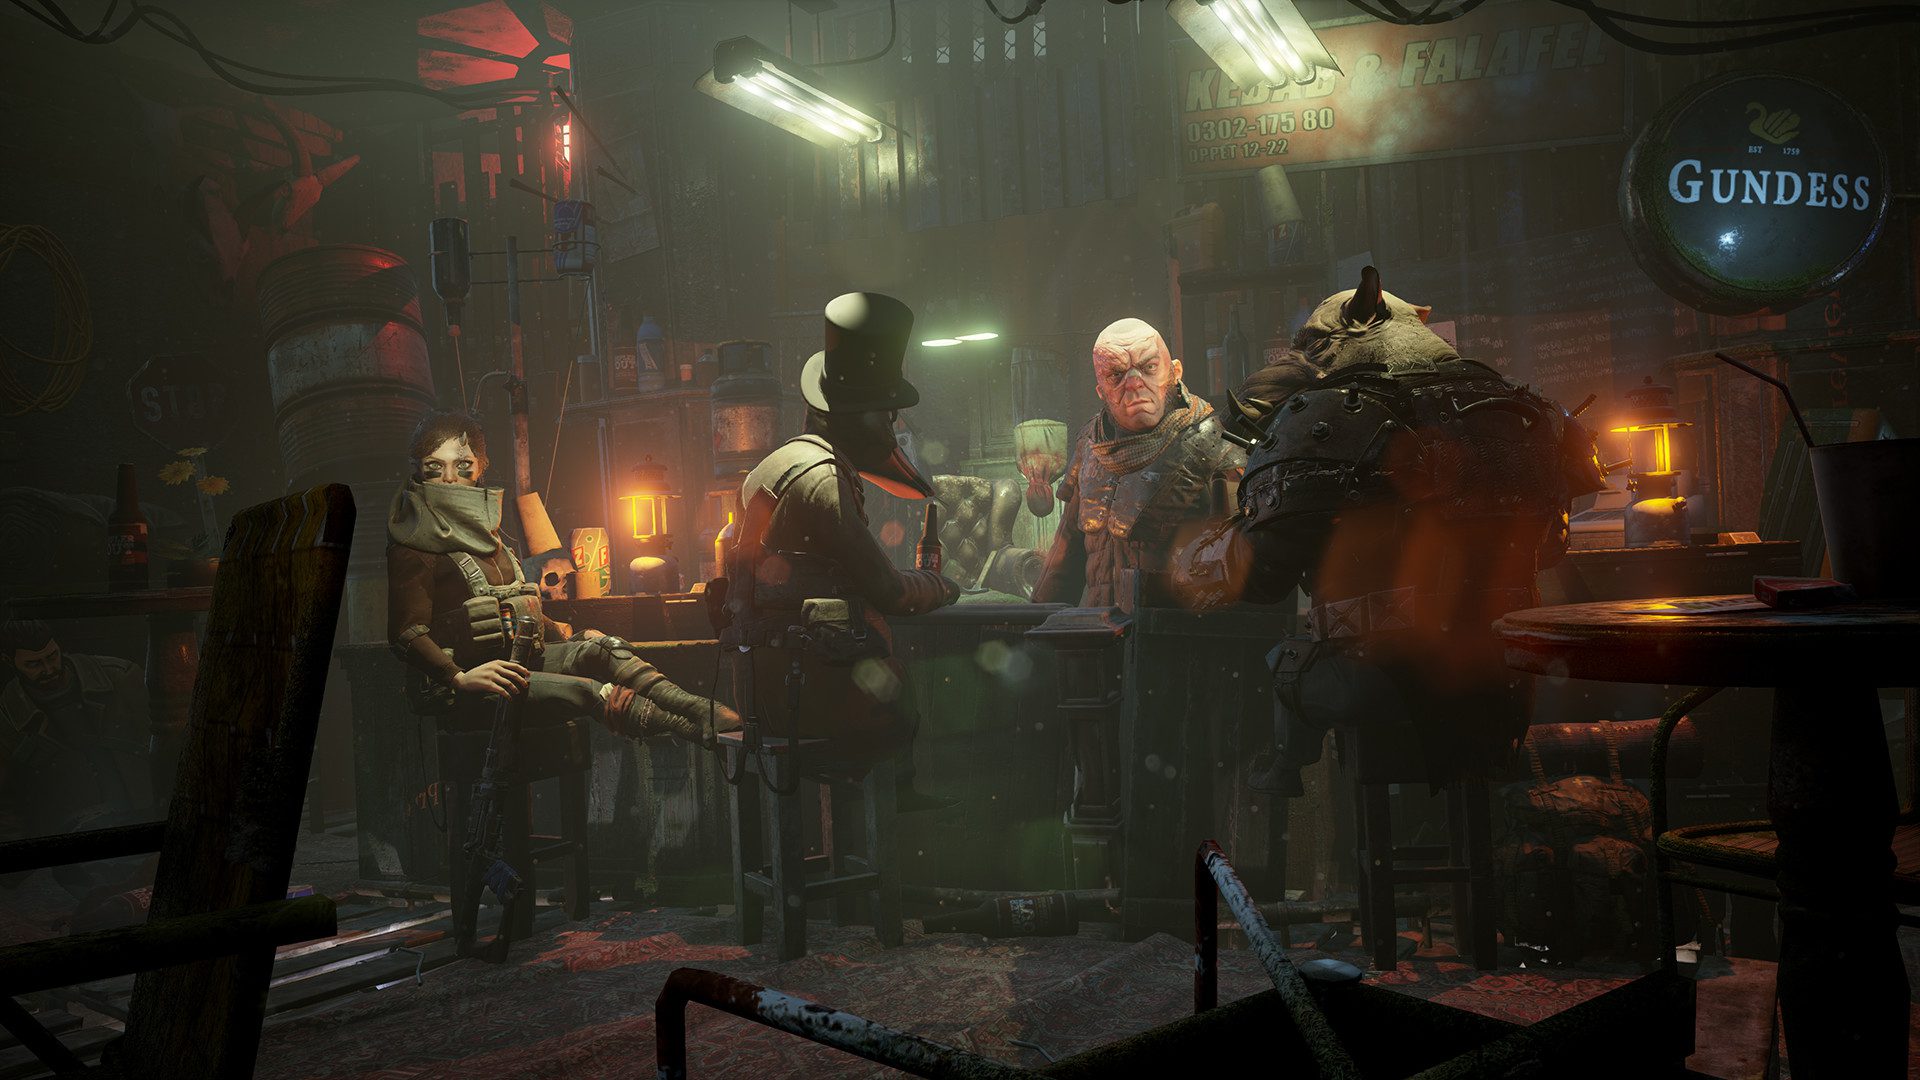 Mutant Year Zero shows off new footage in behind-the-scenes video